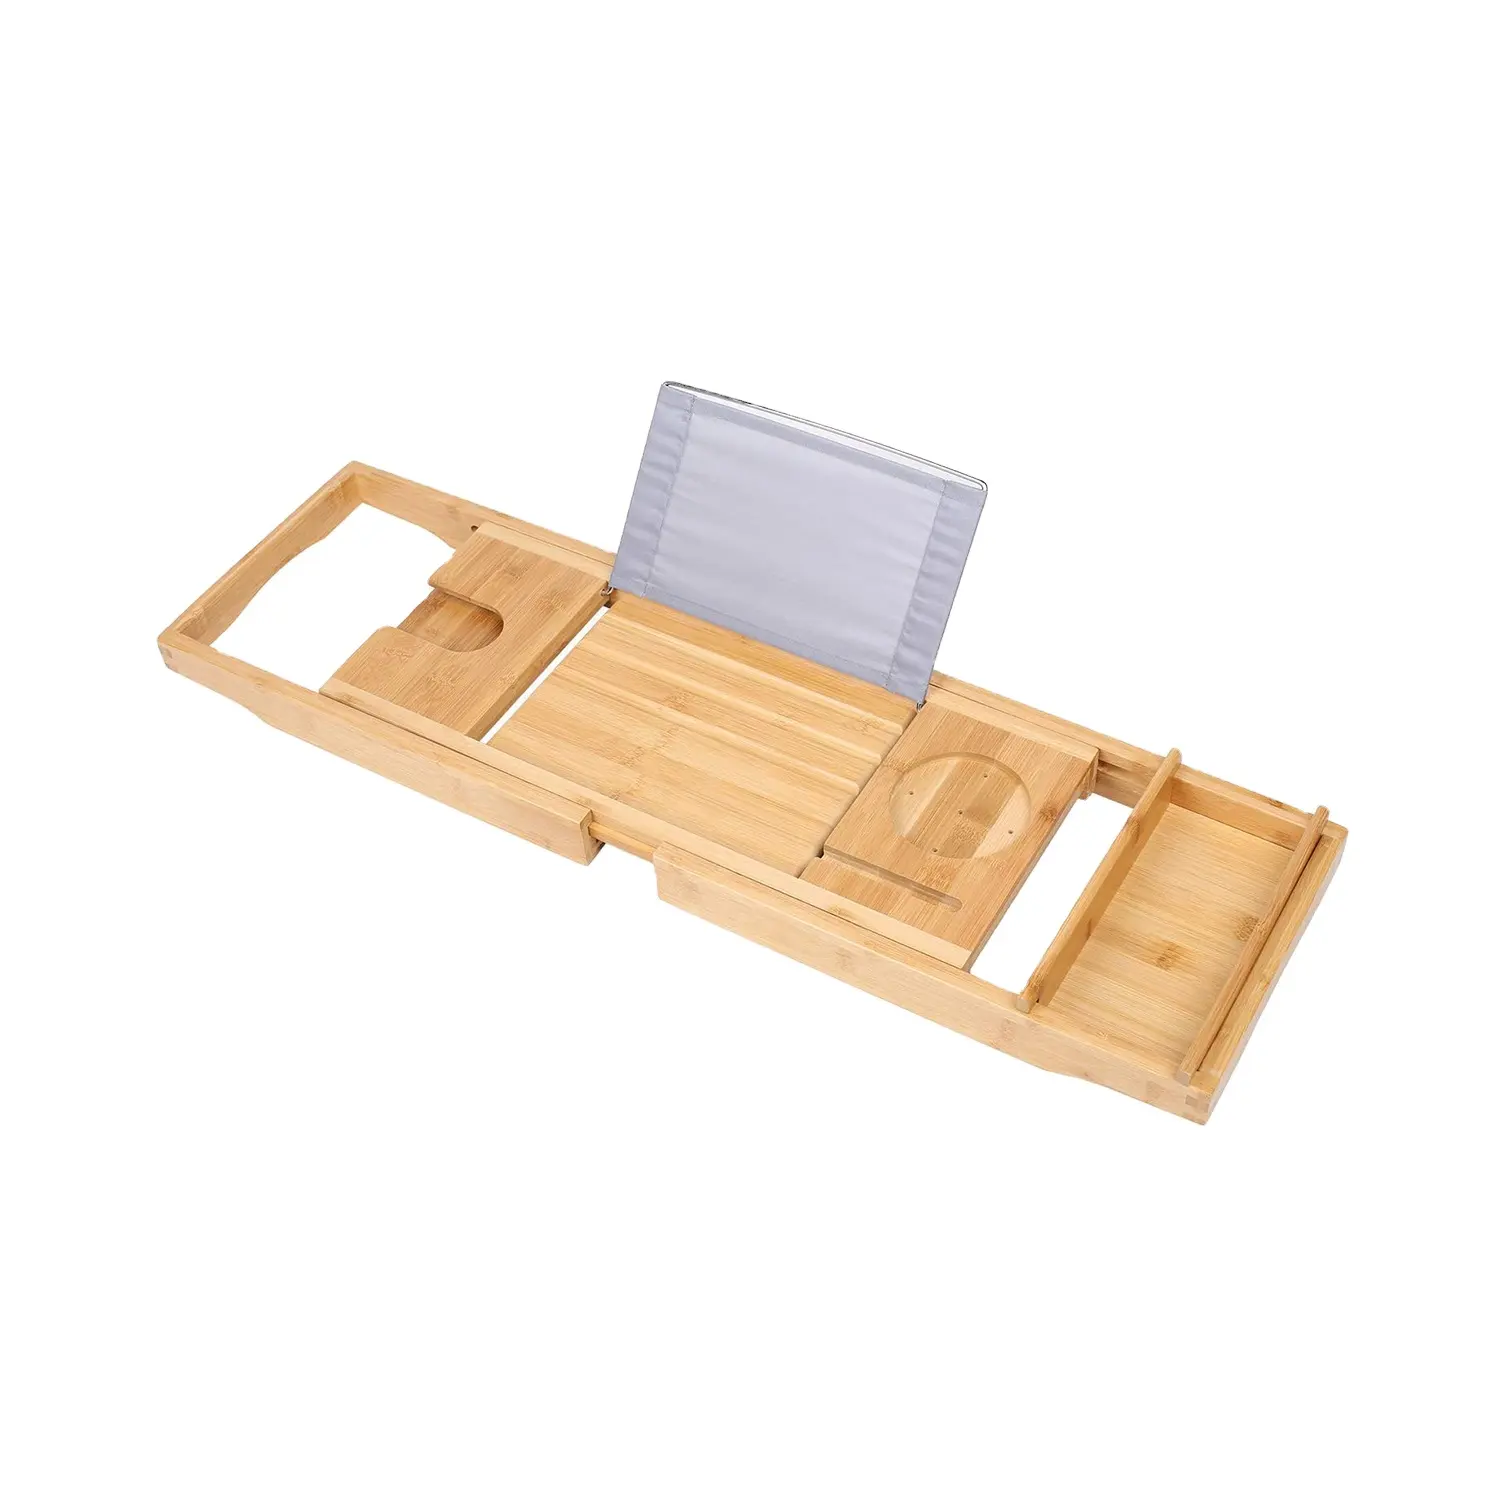 Amazon Top Sellers Extendable Side Luxury Bamboo Bathtub Caddy Bath Tray With Phone Holder Switch Stand Wine Glass Holder